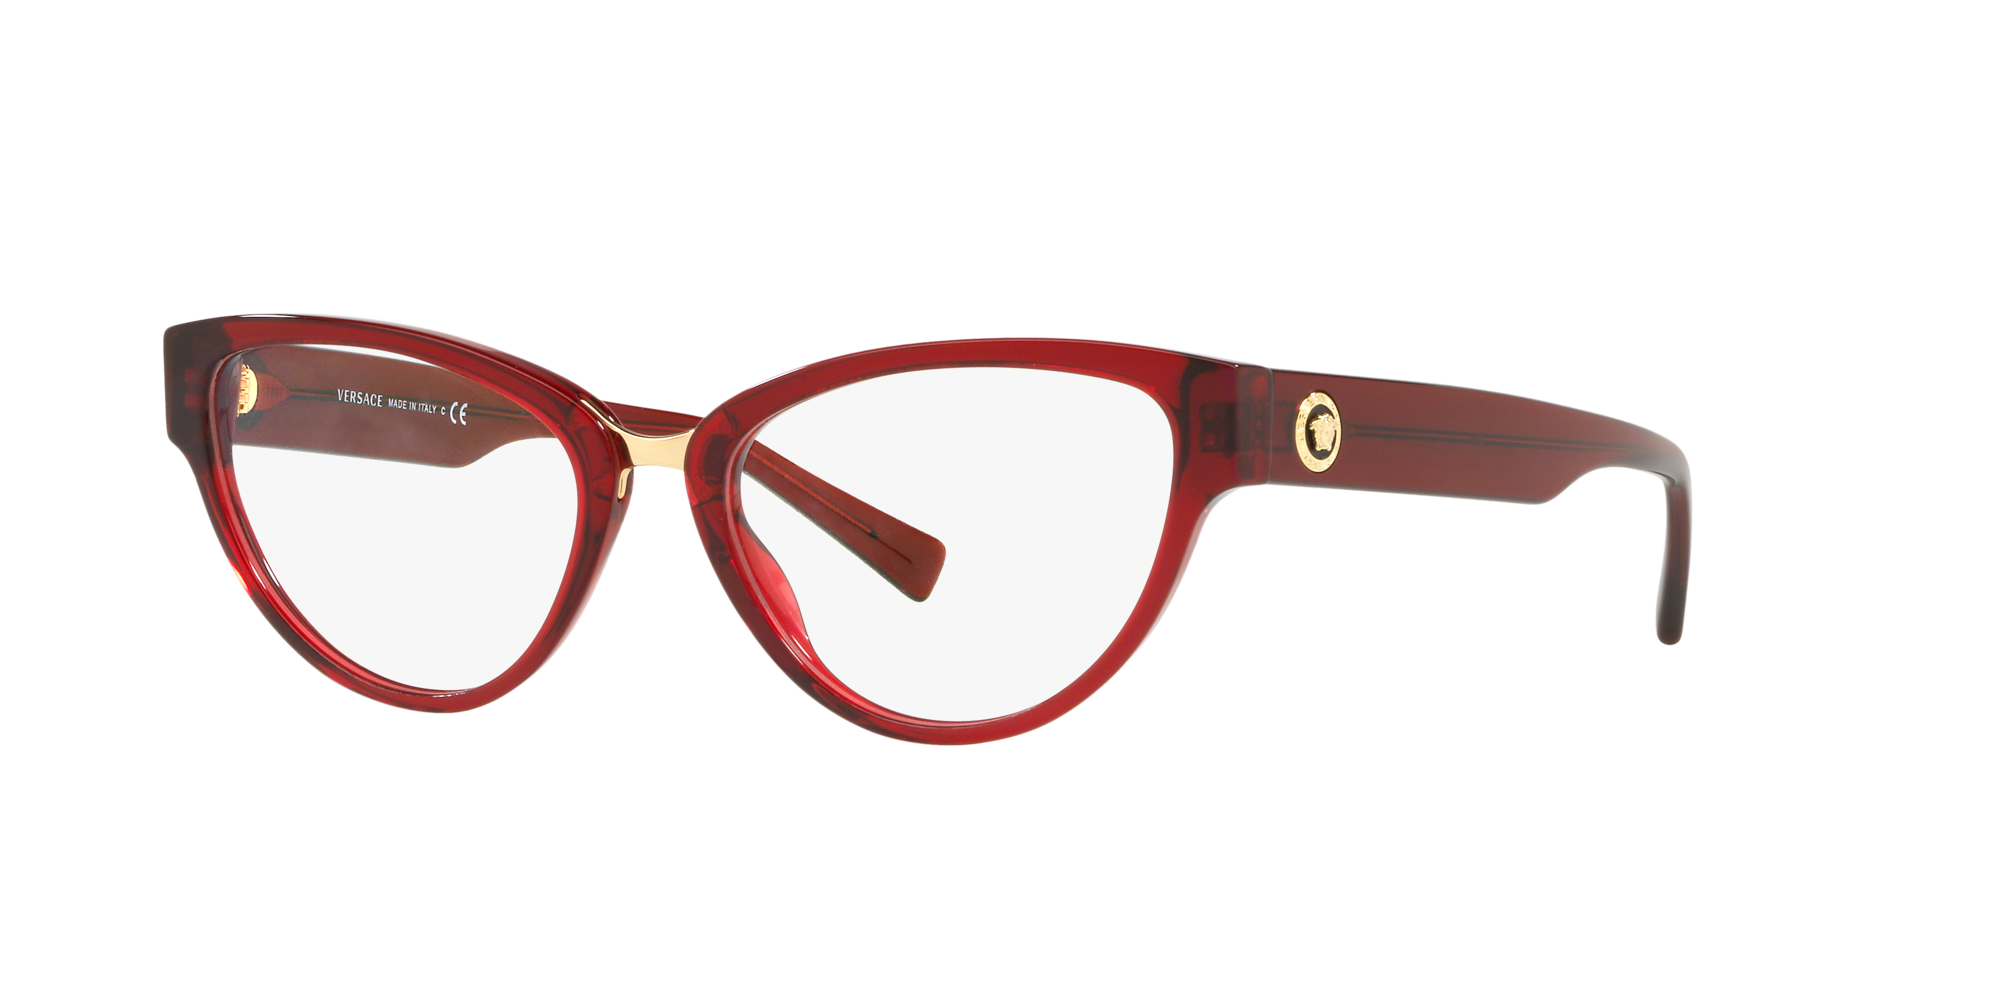 versace red frame glasses